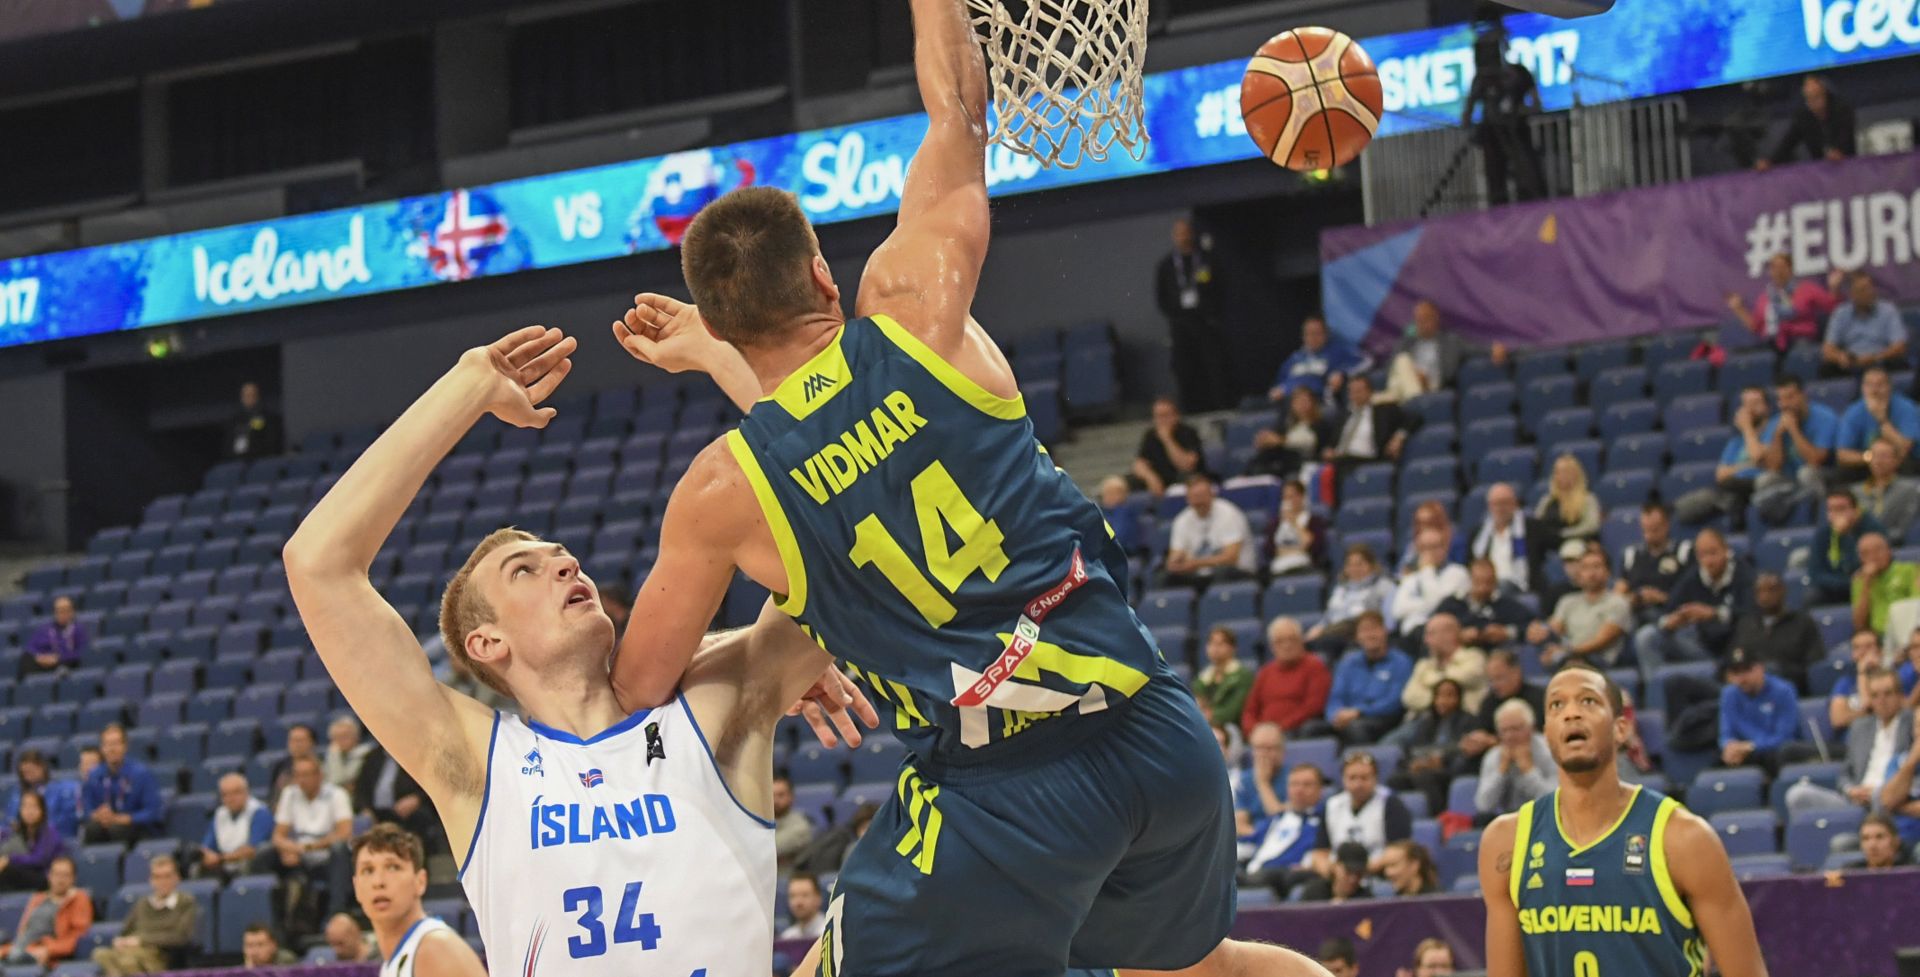 epa06185041 Iceland's Tryggvi Hlinason (L) in action against Slovenia's Gasper Vidmar (2-R) during the EuroBasket 2017 group A match between Iceland and Slovenia, in Helsinki, Finland, 05 September 2017.  EPA/KIMMO BRANDT